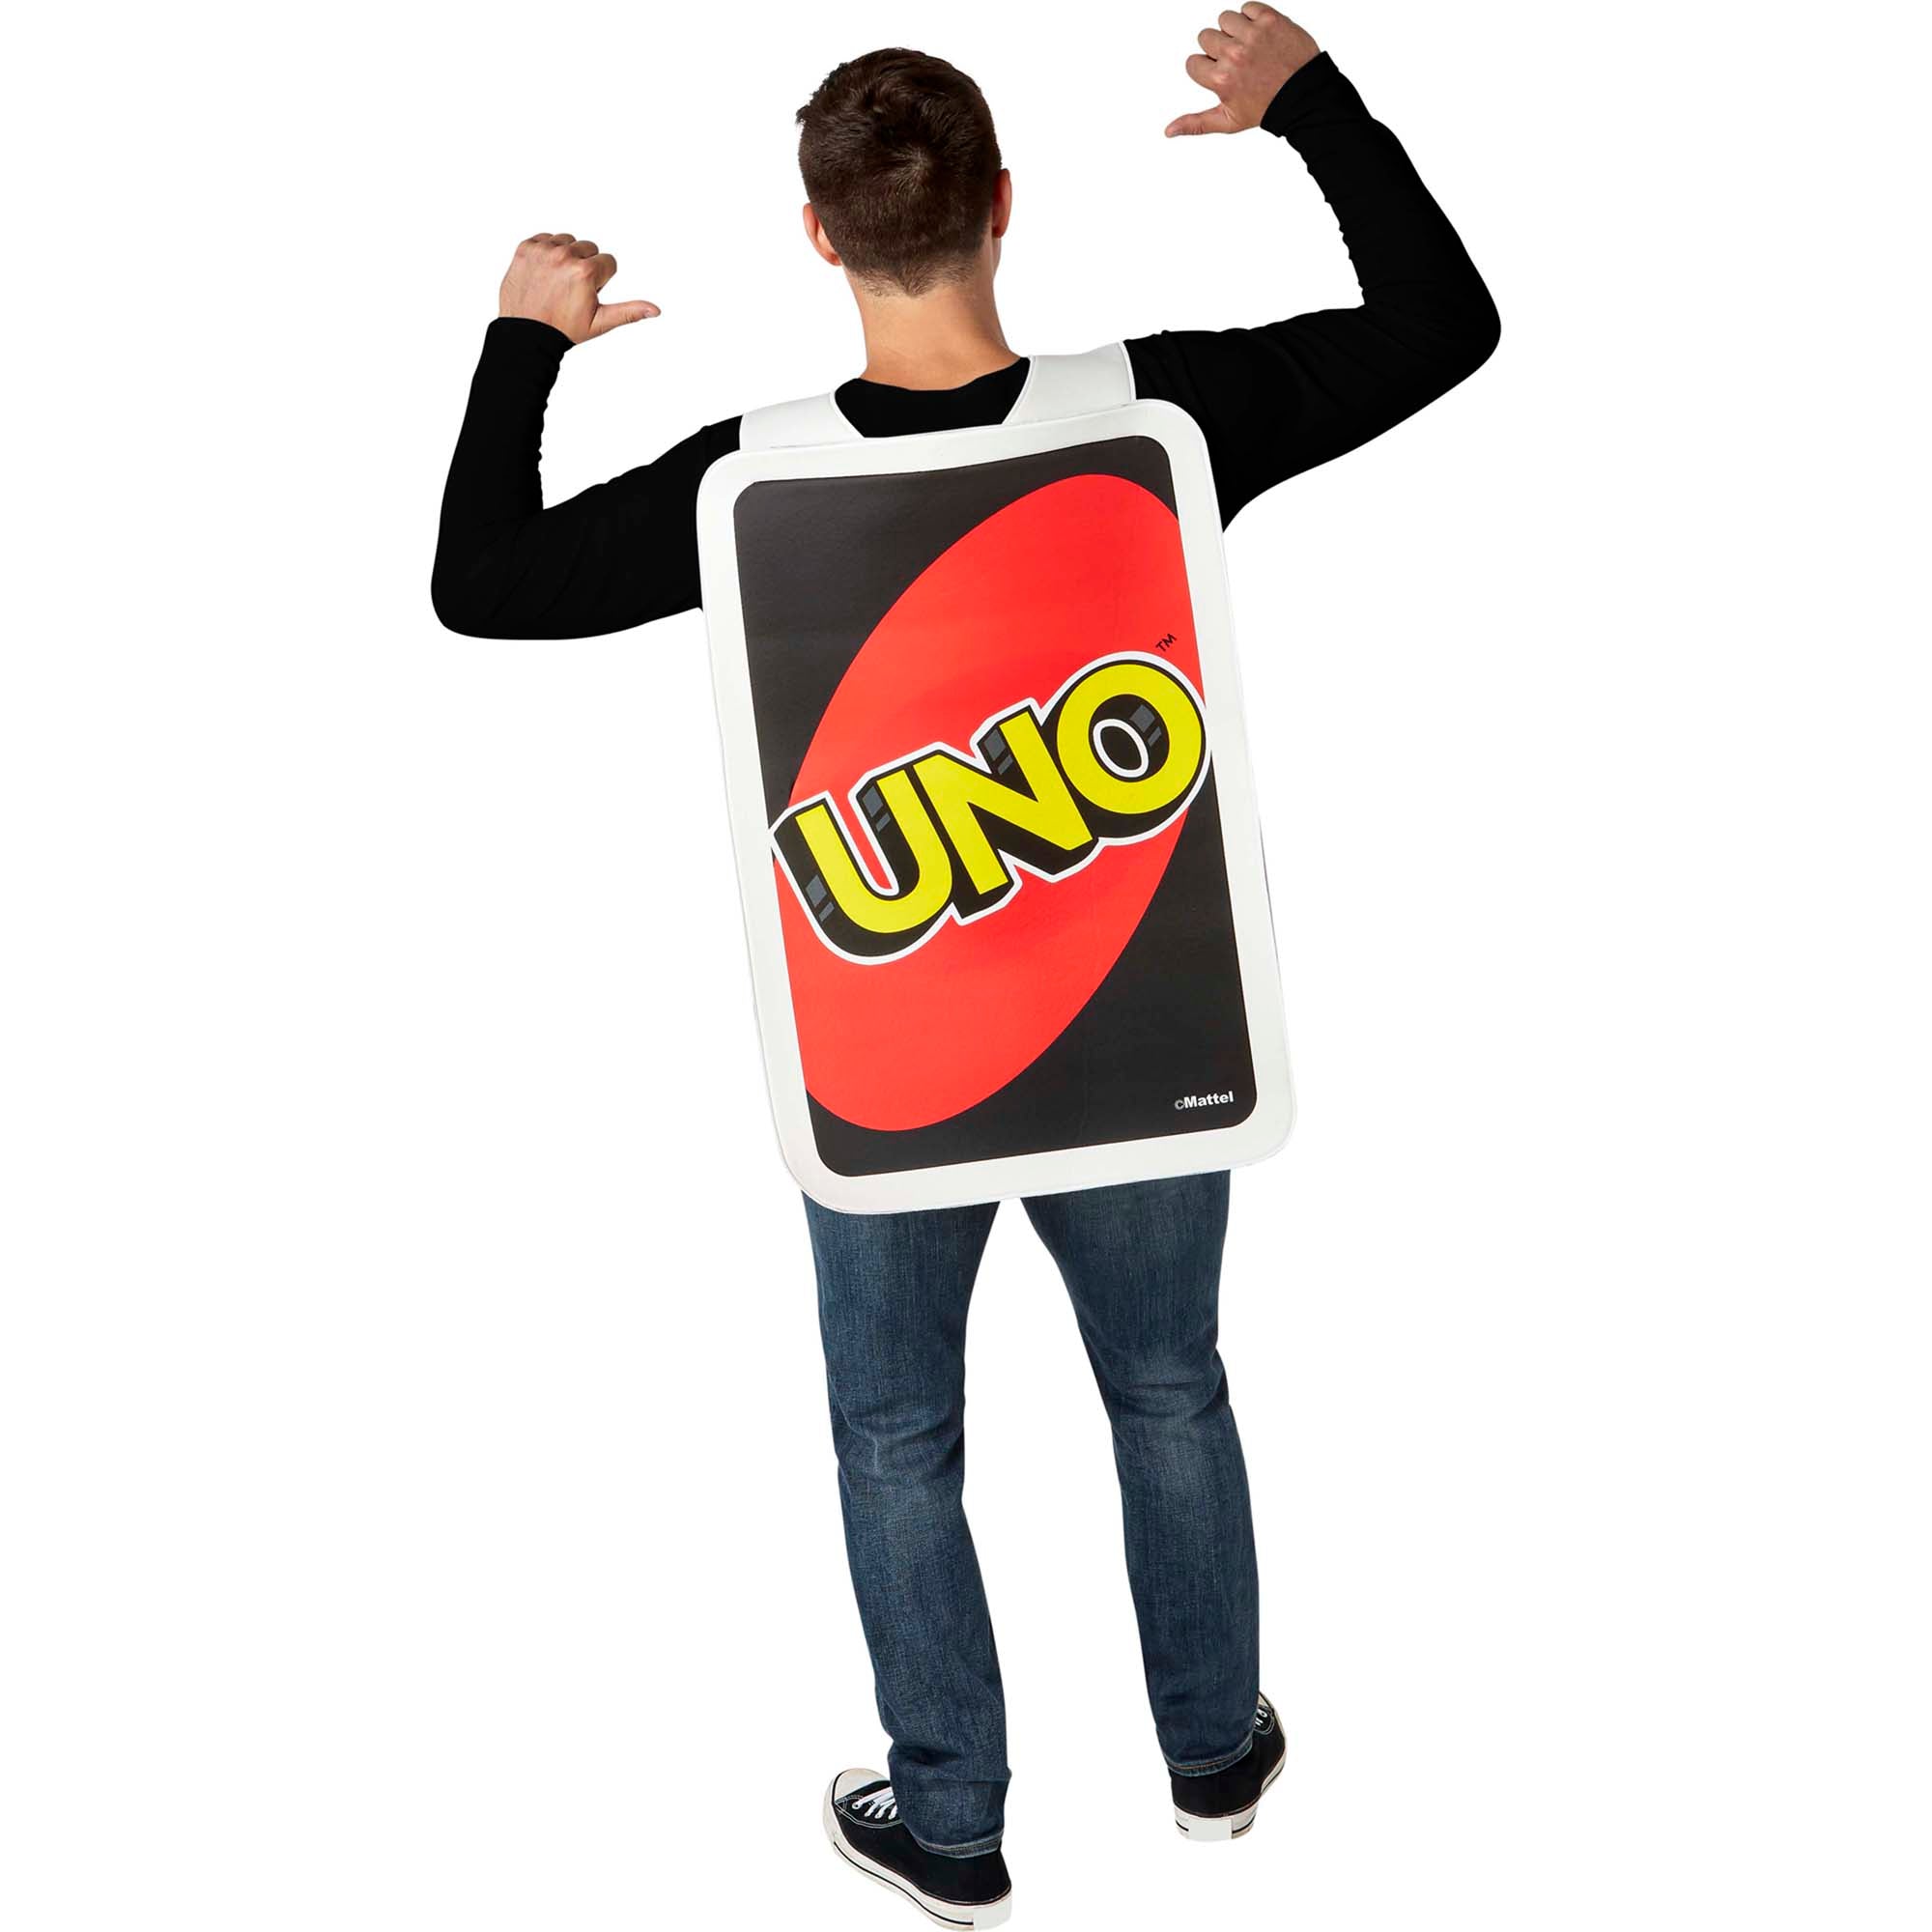 Uno Reverse Pride Gifts & Merchandise for Sale